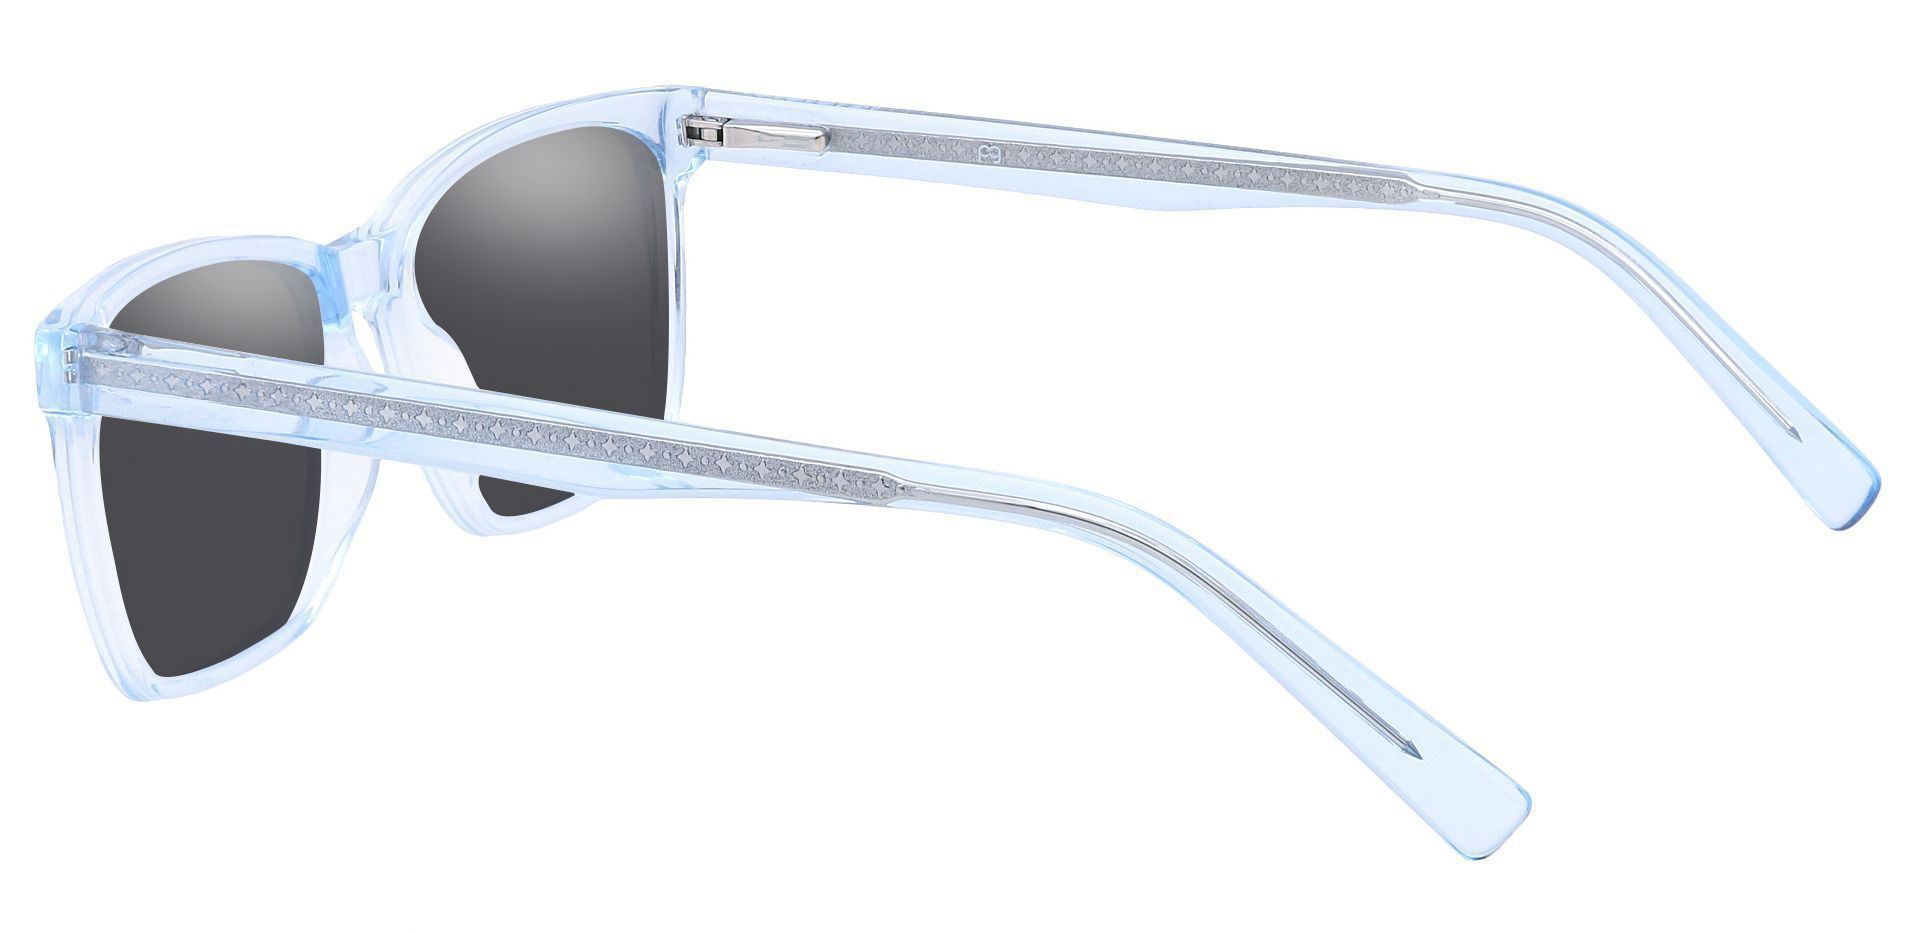 Galaxy Rectangle Reading Sunglasses - Blue Frame With Gray Lenses